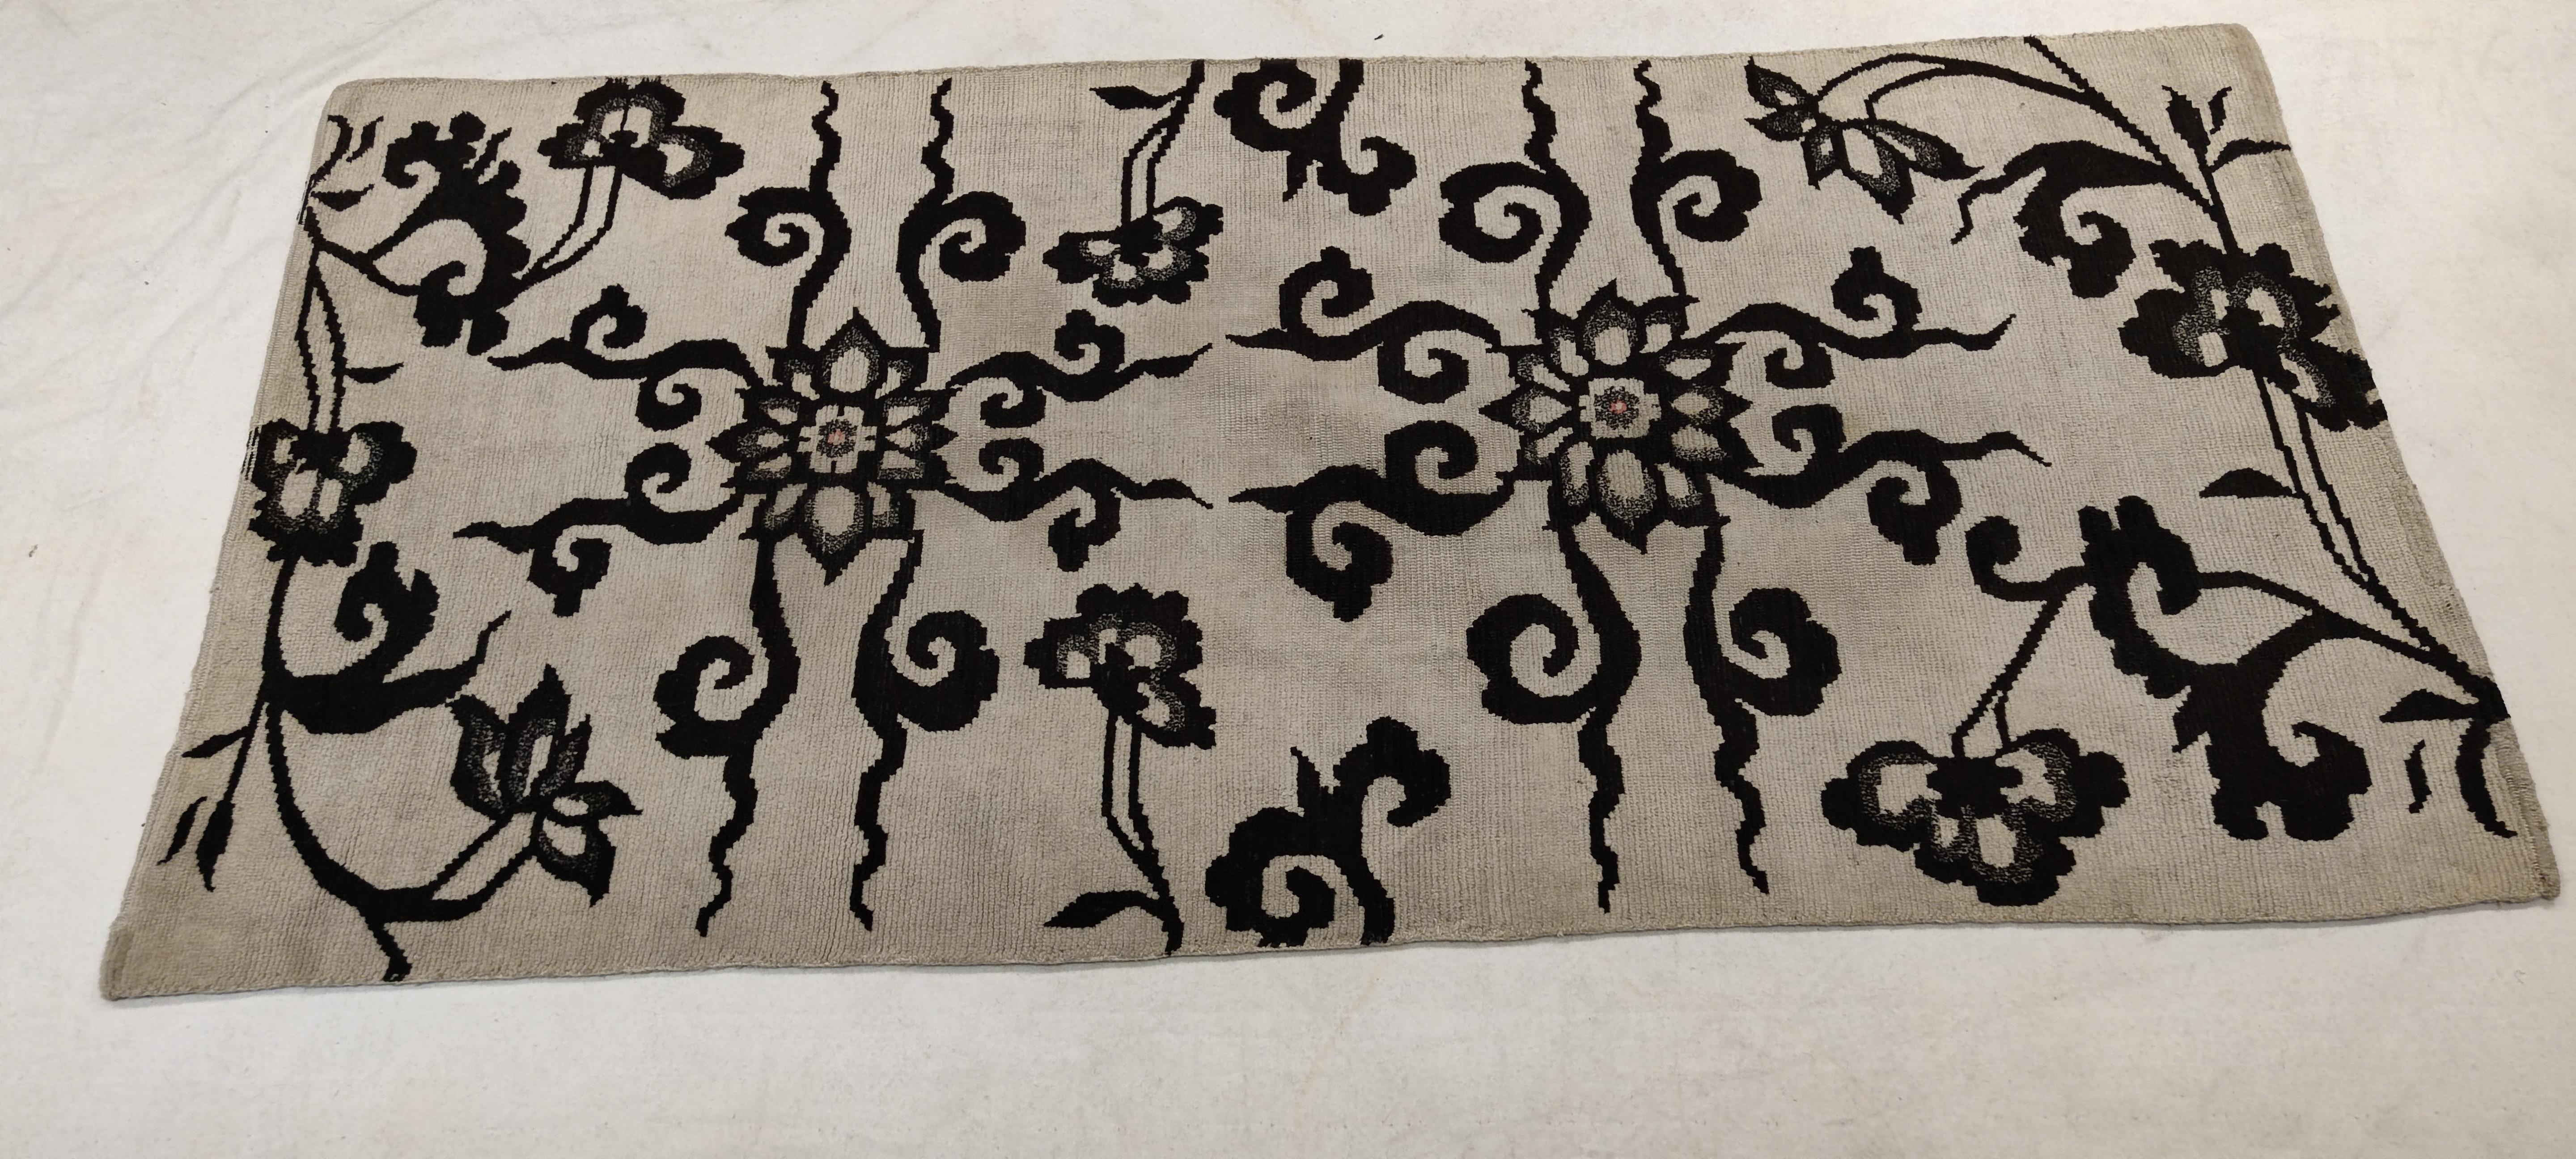 Hand-Knotted Antique White Ground Tibetan Khaden Rug with Black Lotus Flowers and Tendrils